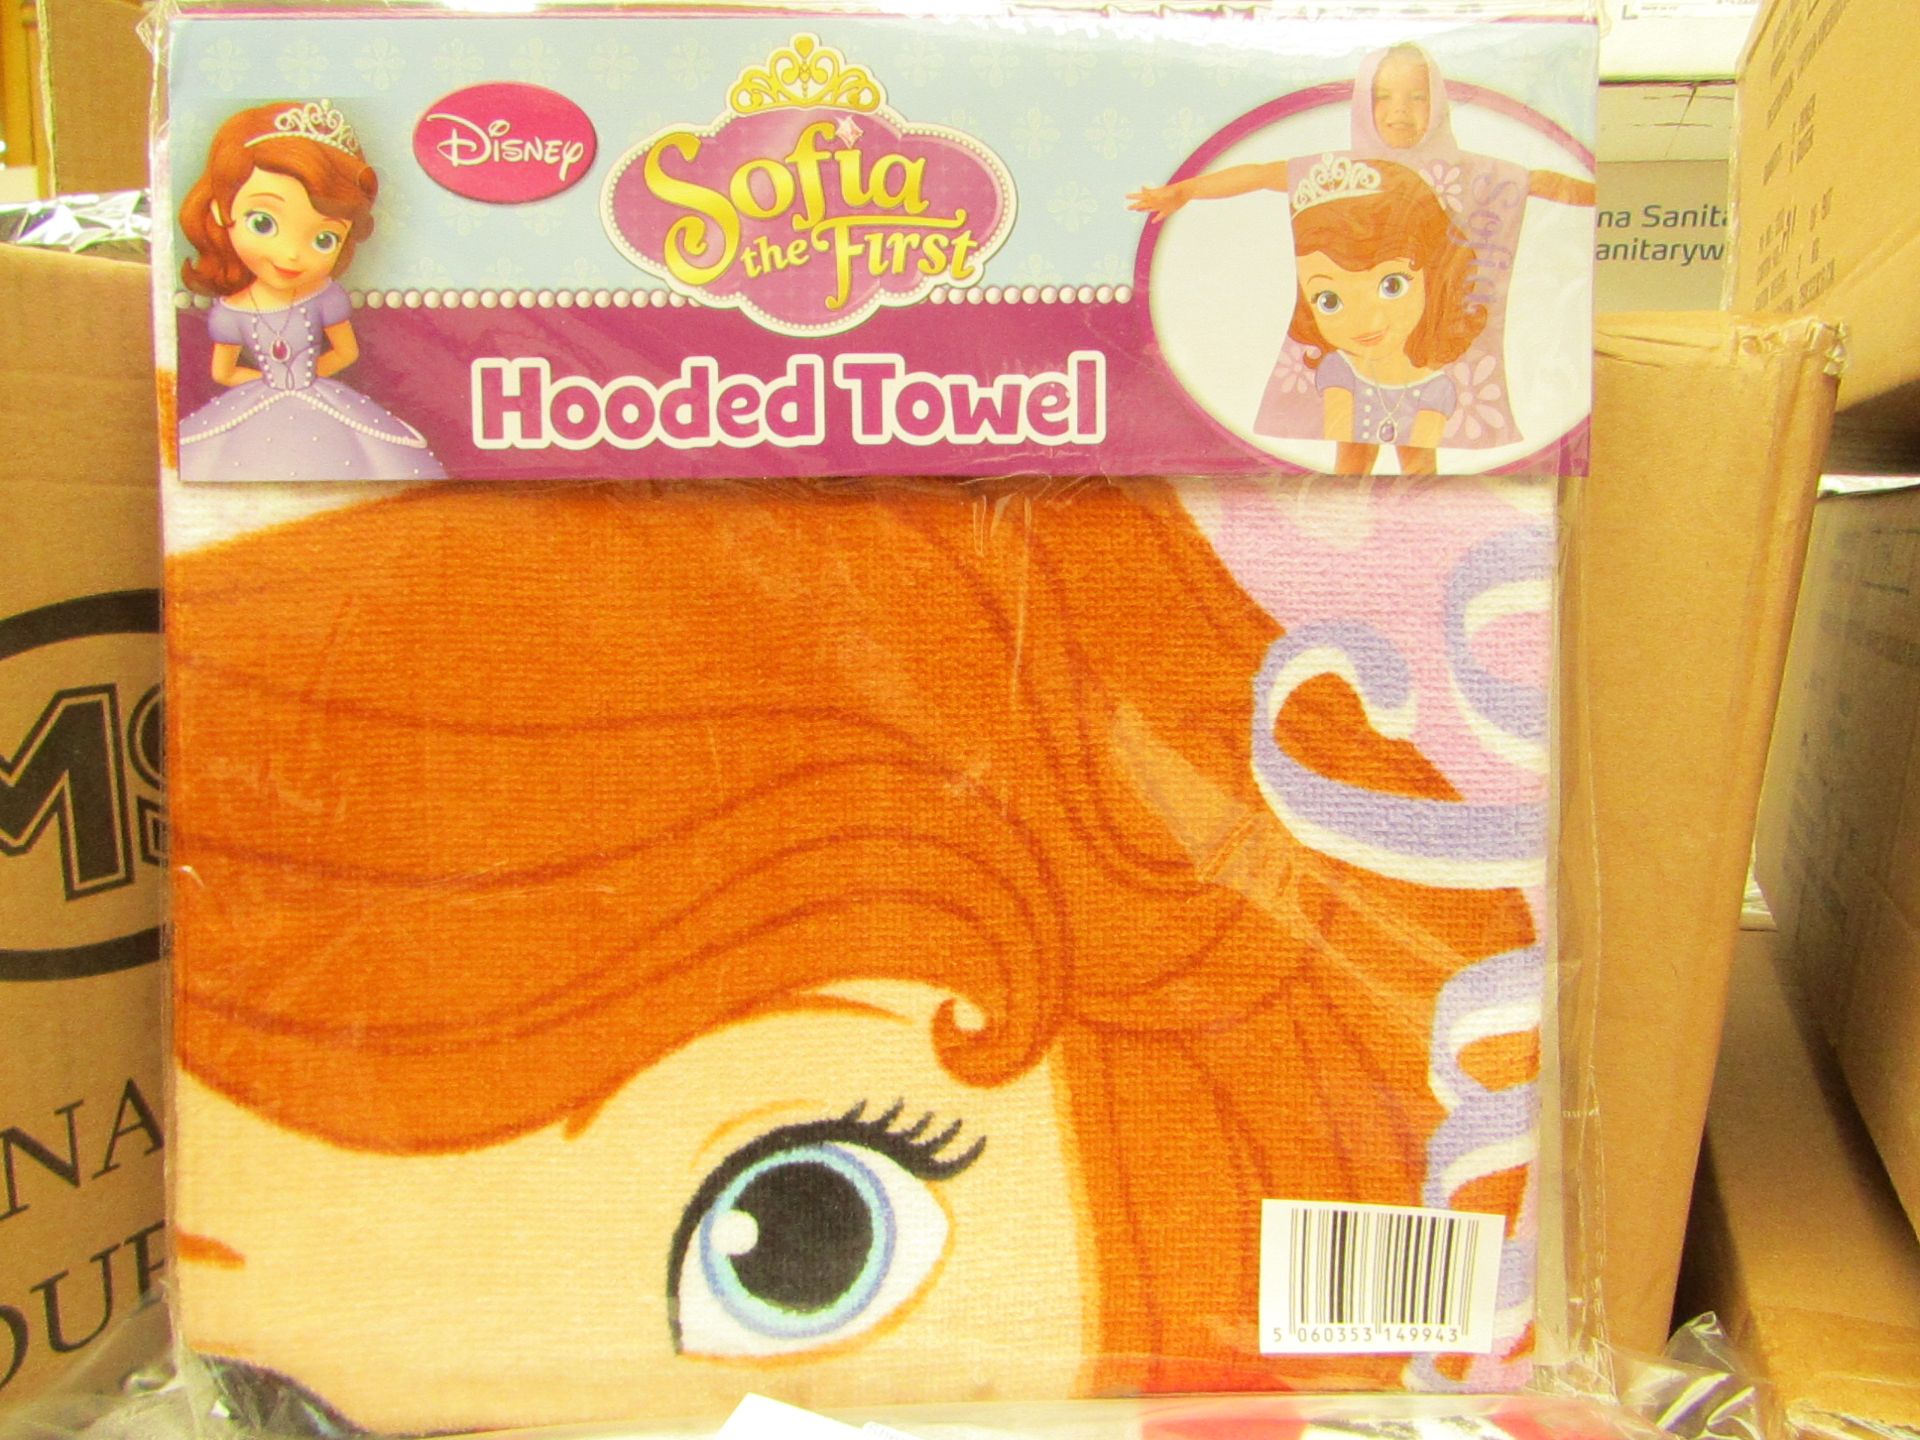 Disney Sofia the First hooded towel, new and packaged.